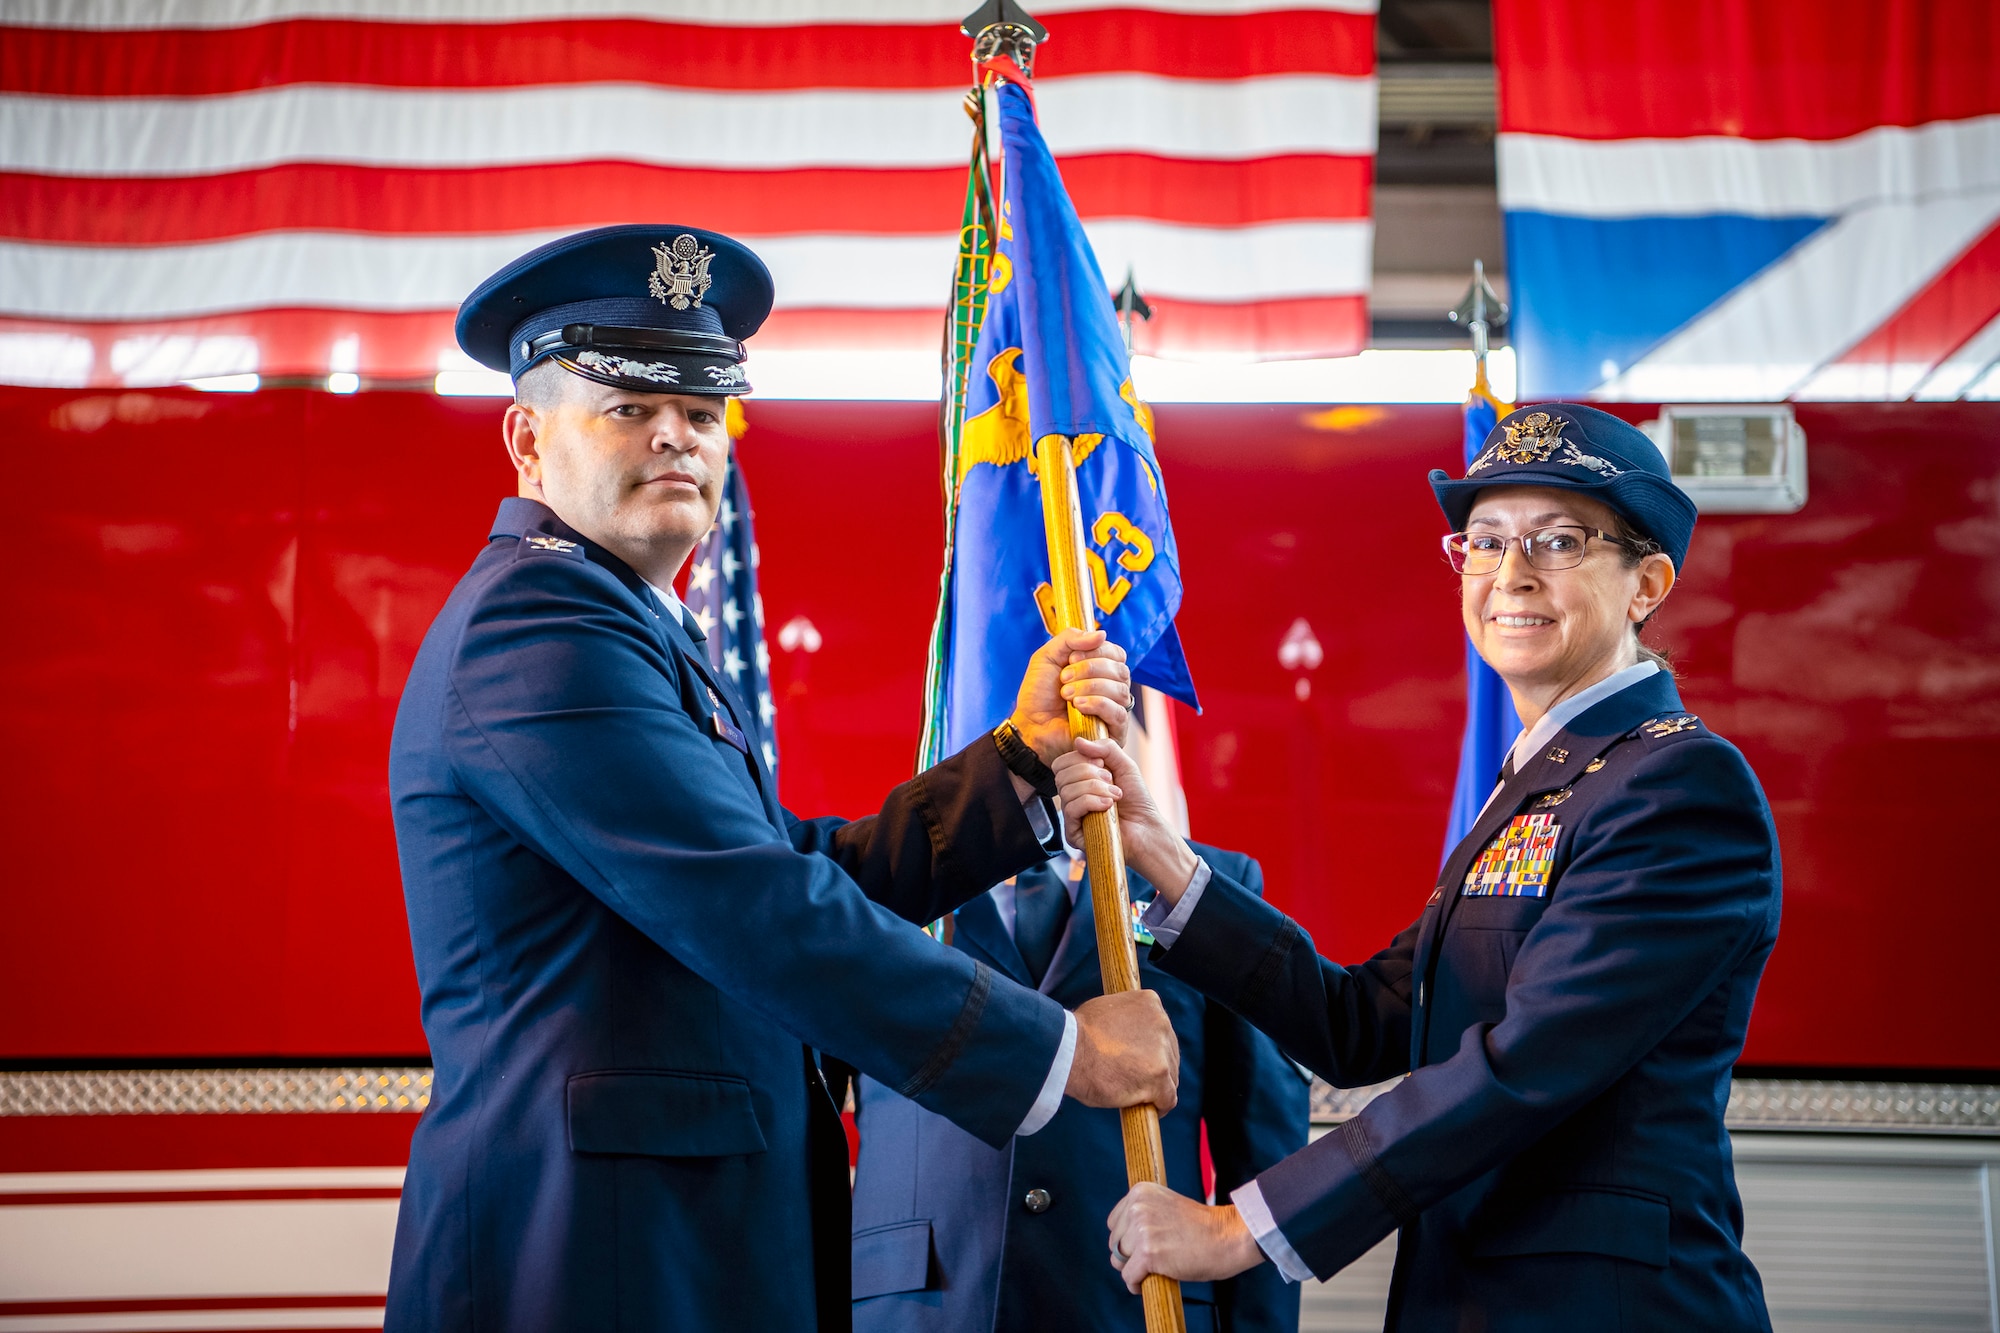 U.S. Air Force Col. Valarie Long, right, 423d Air Base Group incoming commander, receives the guidon from Col. Brian Filler, 501st Combat Support Wing commander, during a change of command ceremony at RAF Alconbury, England, July 25, 2022. Prior to assuming command, Long served as the Director of Information Warfare at the 603d Air Operations Center, Ramstein AB, Germany. (U.S. Air Force photo by Staff Sgt. Eugene Oliver)